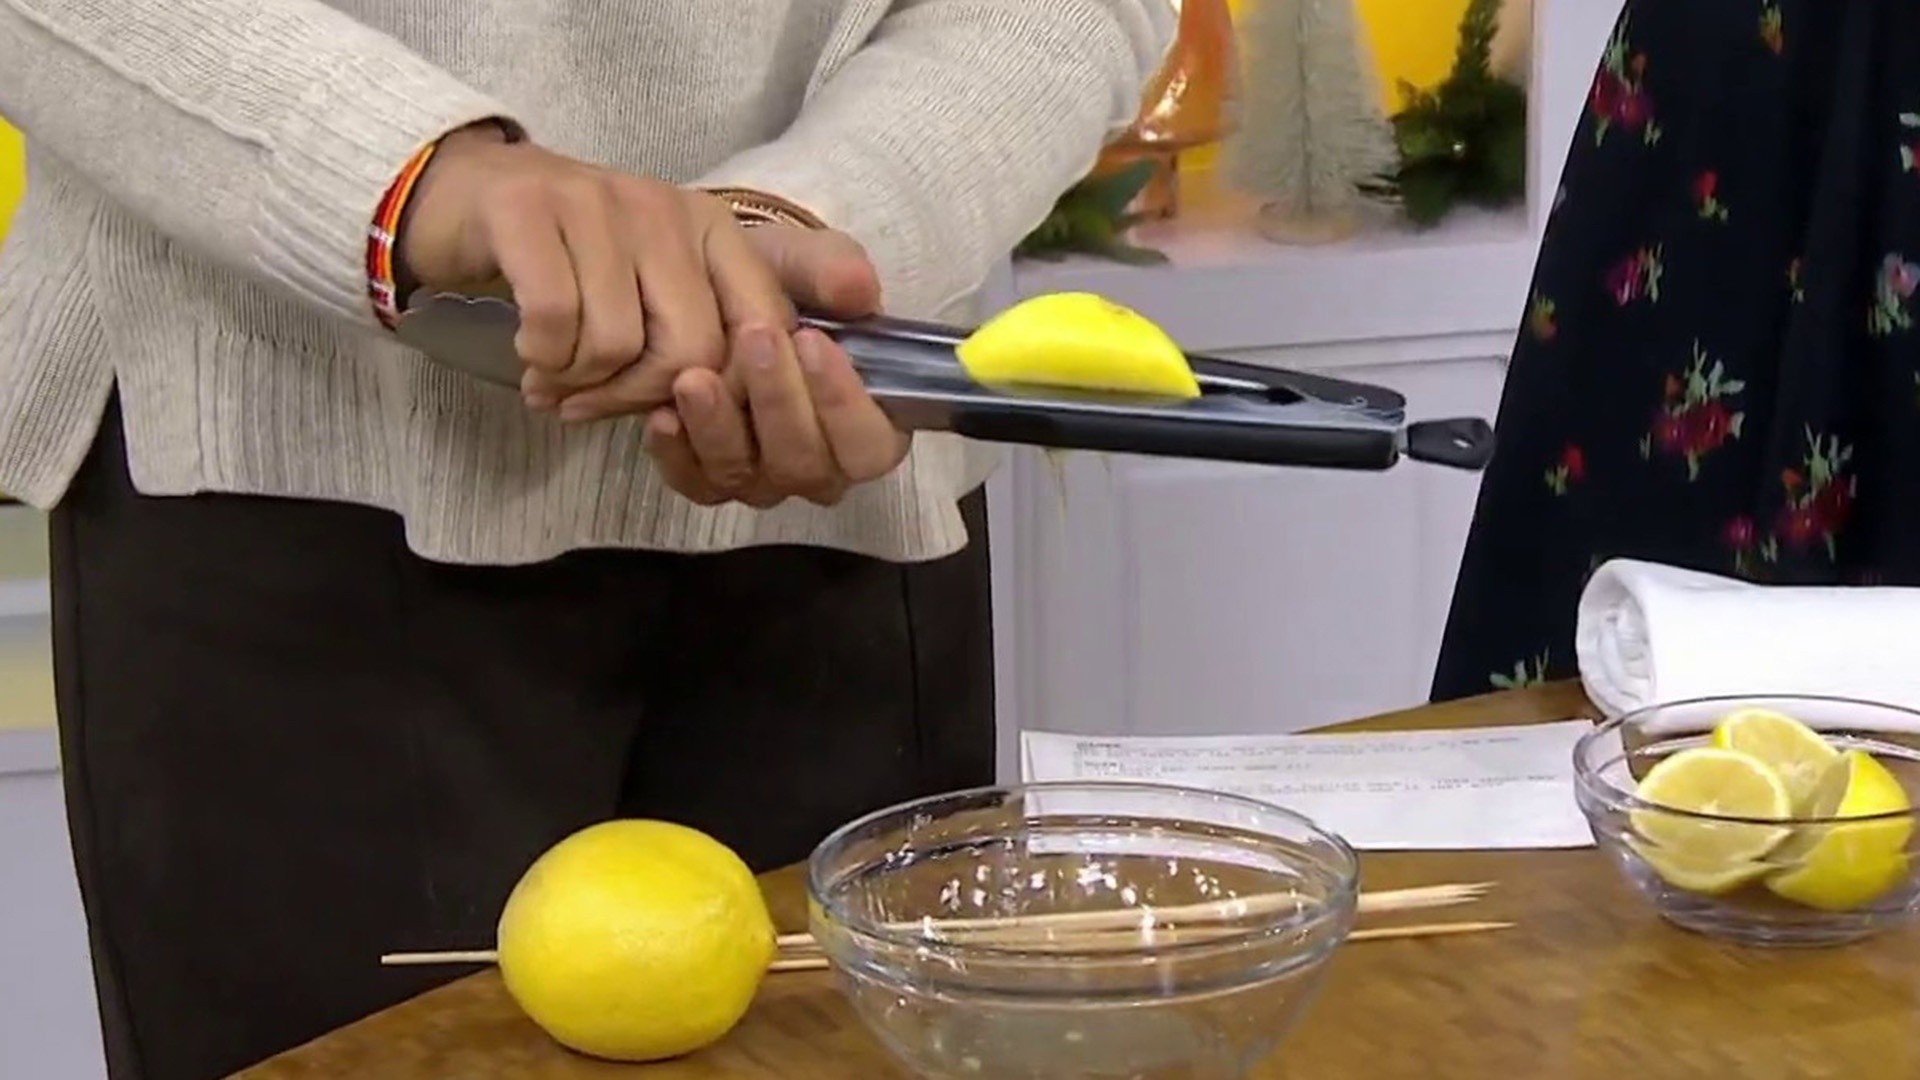 Hoda & Jenna try viral kitchen hacks: See which ones work!